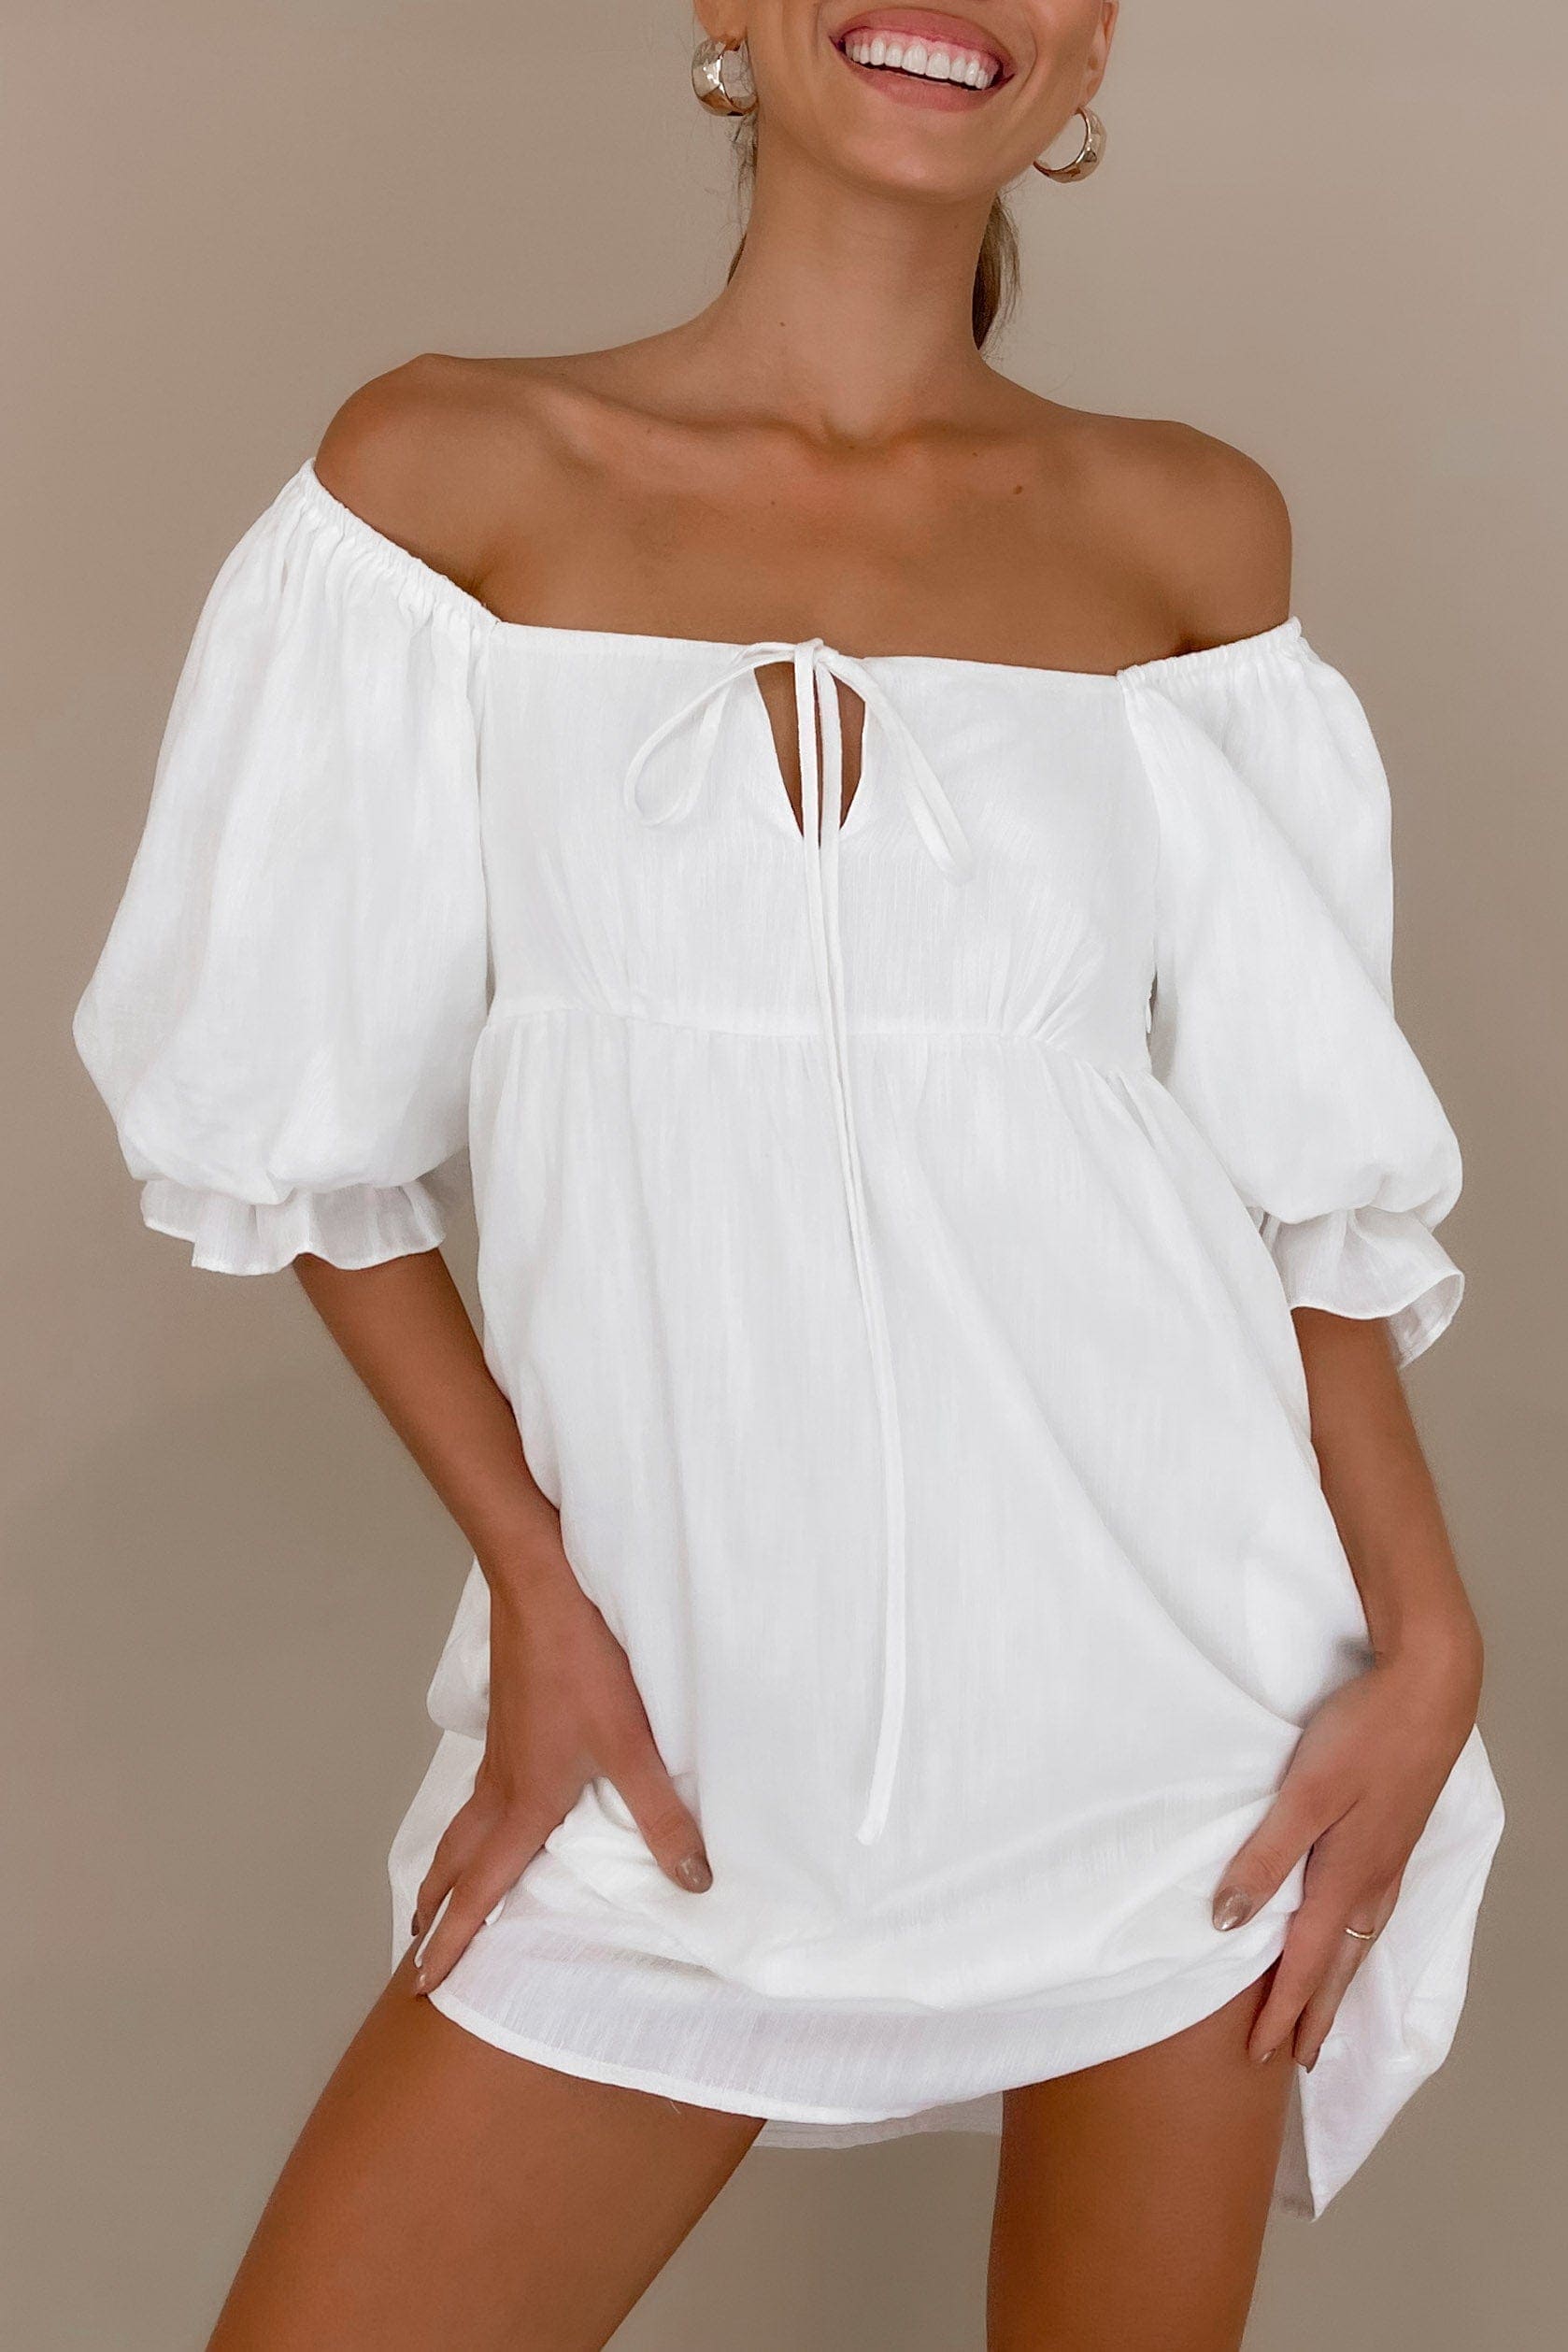 Yalie Dress, COTTON & POLYESTER, COTTON AND POLYESTER, DRESS, DRESSES, MINI DRESS, new arrivals, OFF SHOULDER, POLYESTER & COTTON, POLYESTER AND COTTON, WHITE, , -MISHKAH